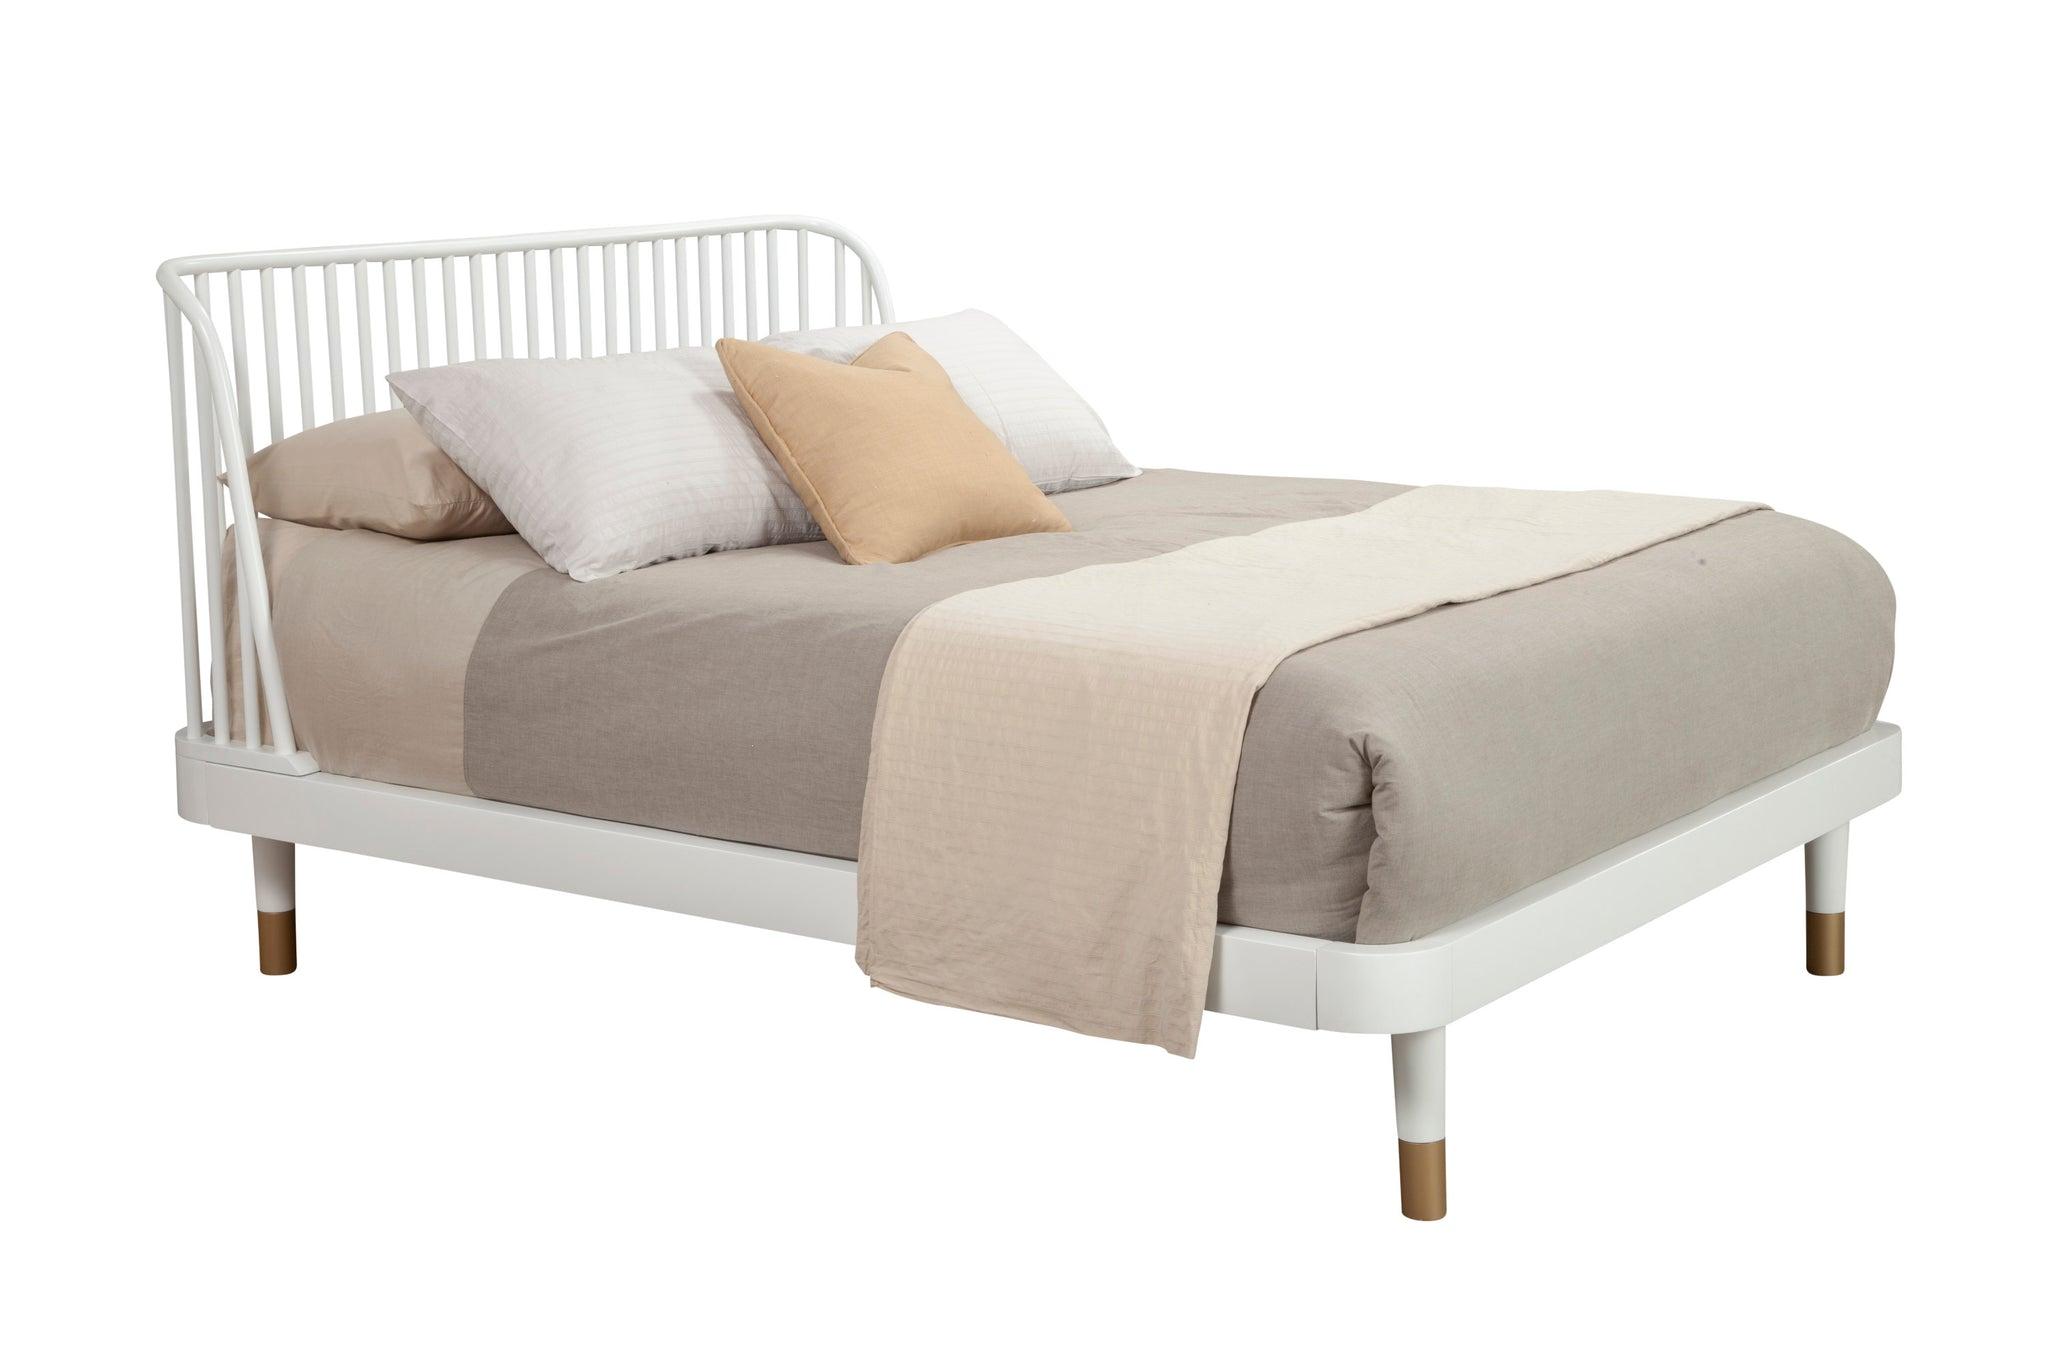 Contemporary Platform Bed MADELYN 2010-67CK in White 